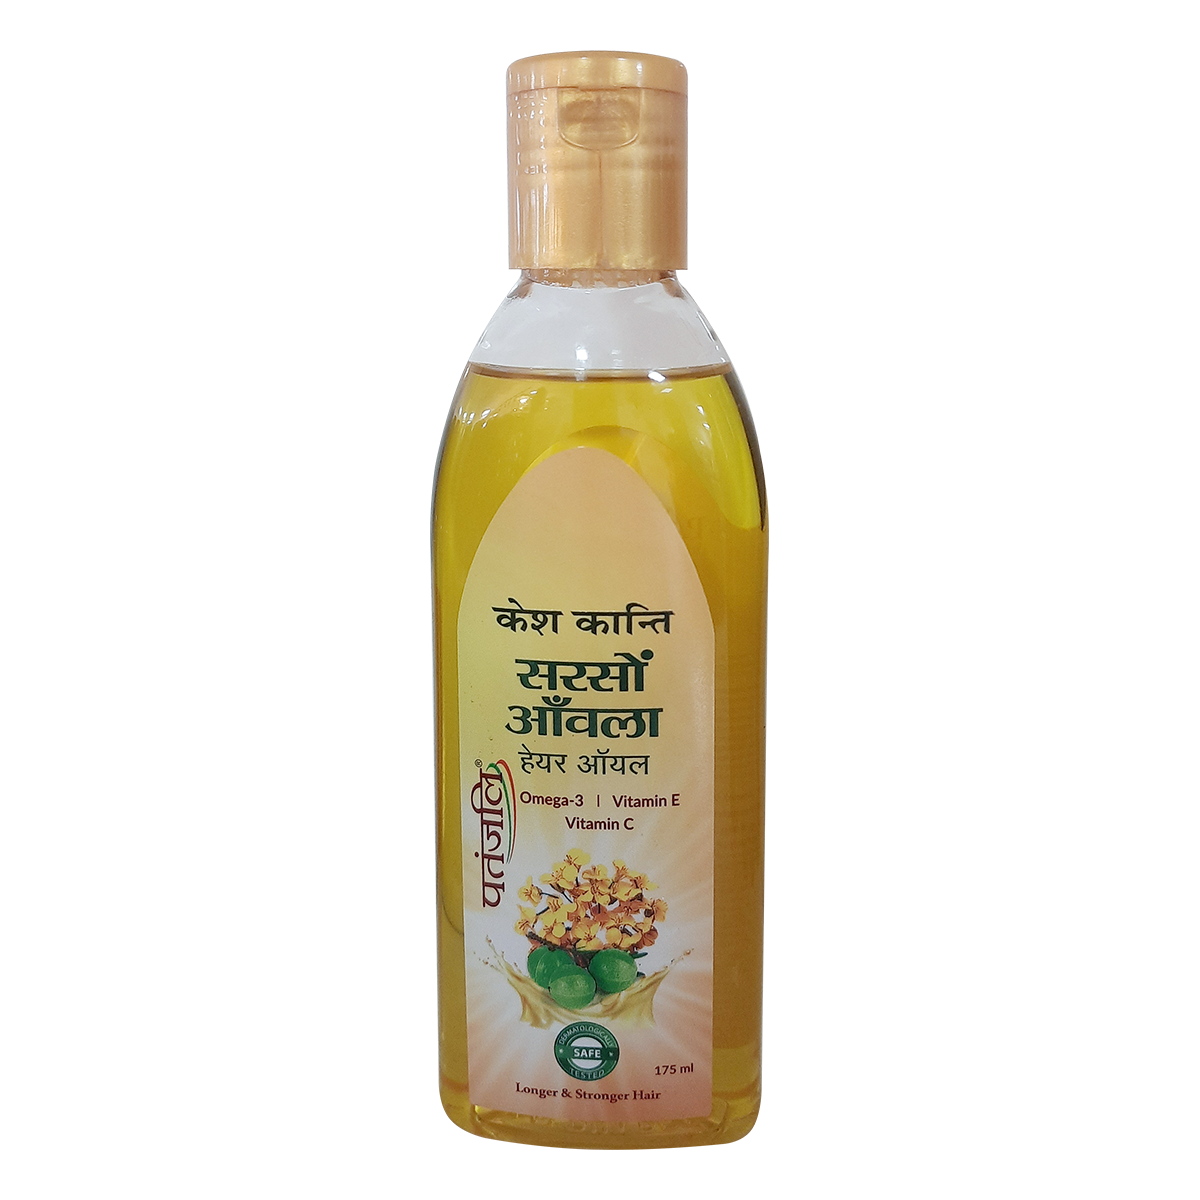 Patanjali Mustard Oil | Product by Patanjali Ayurved - YouTube